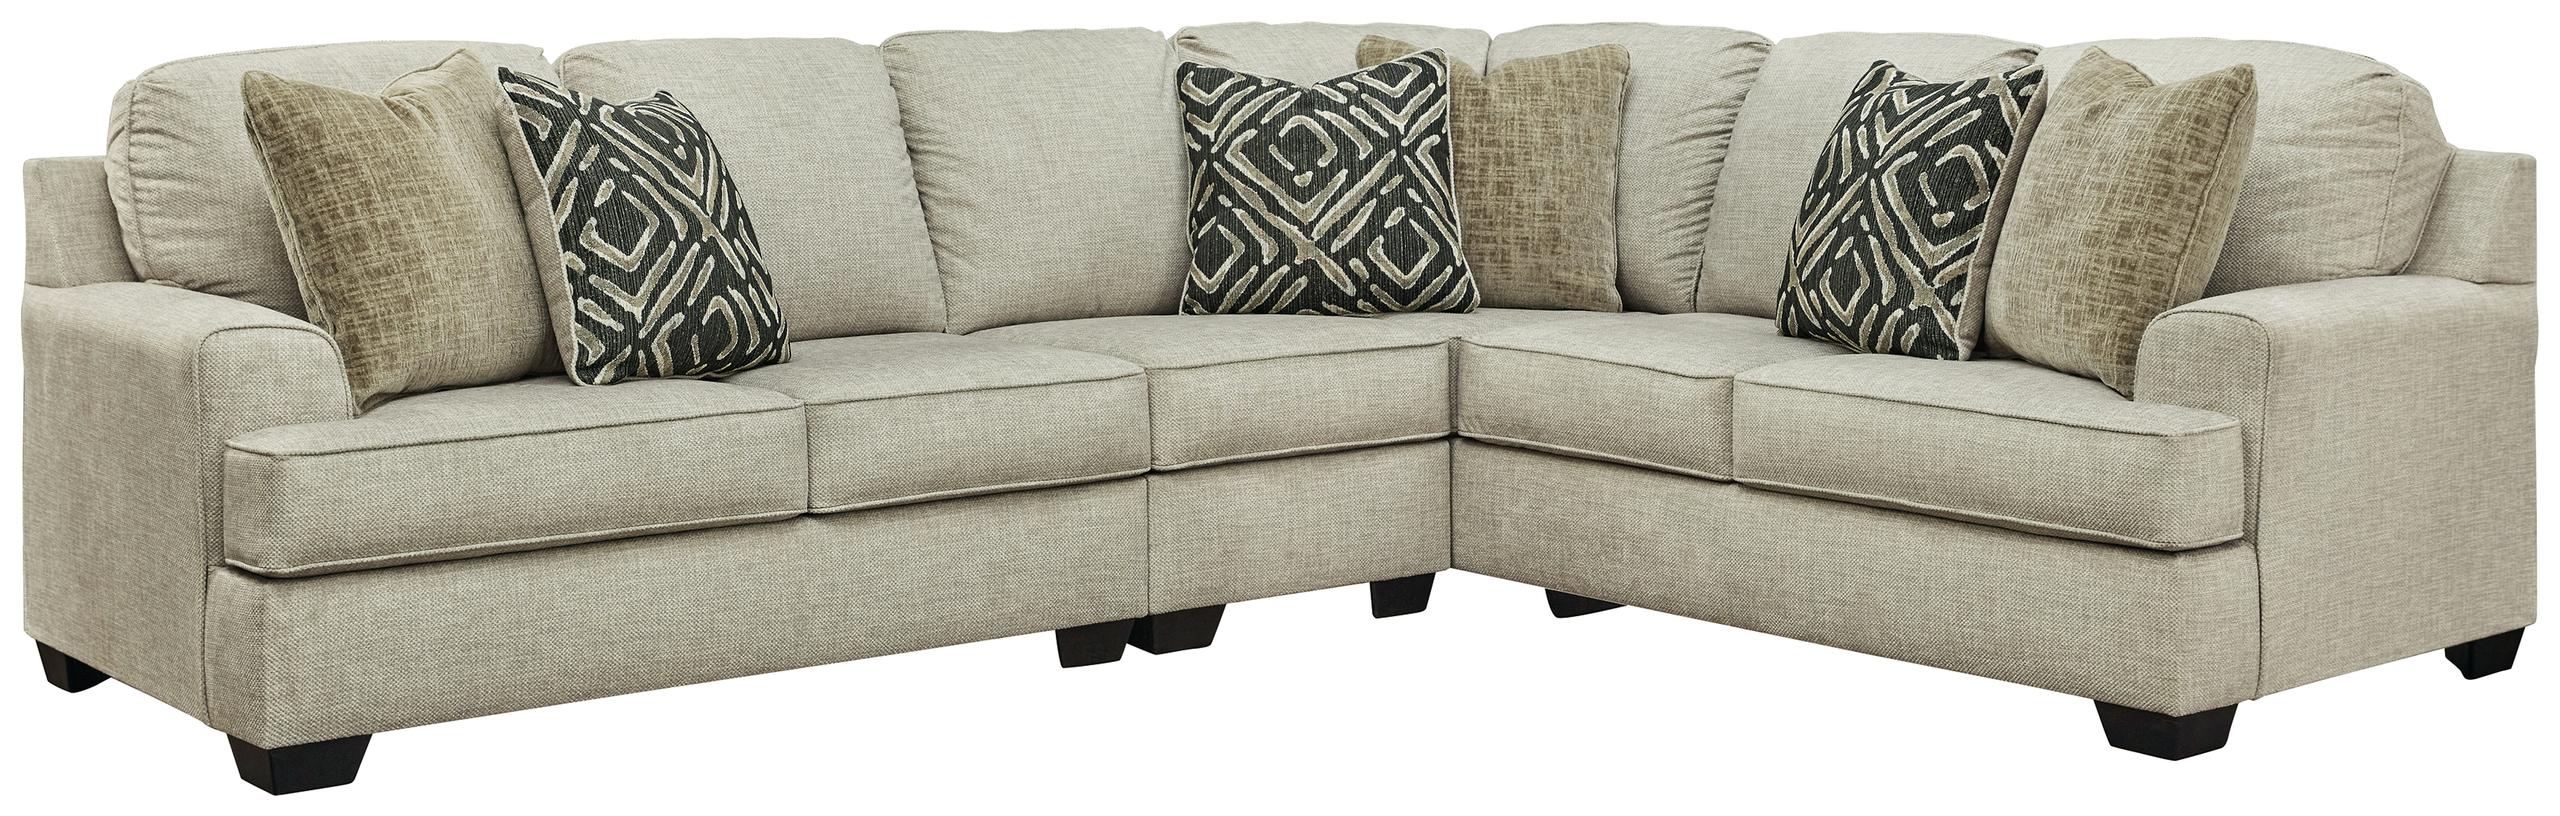 ASHLEY FURNITURE 90004S4 Wellhaven 3-piece Sectional